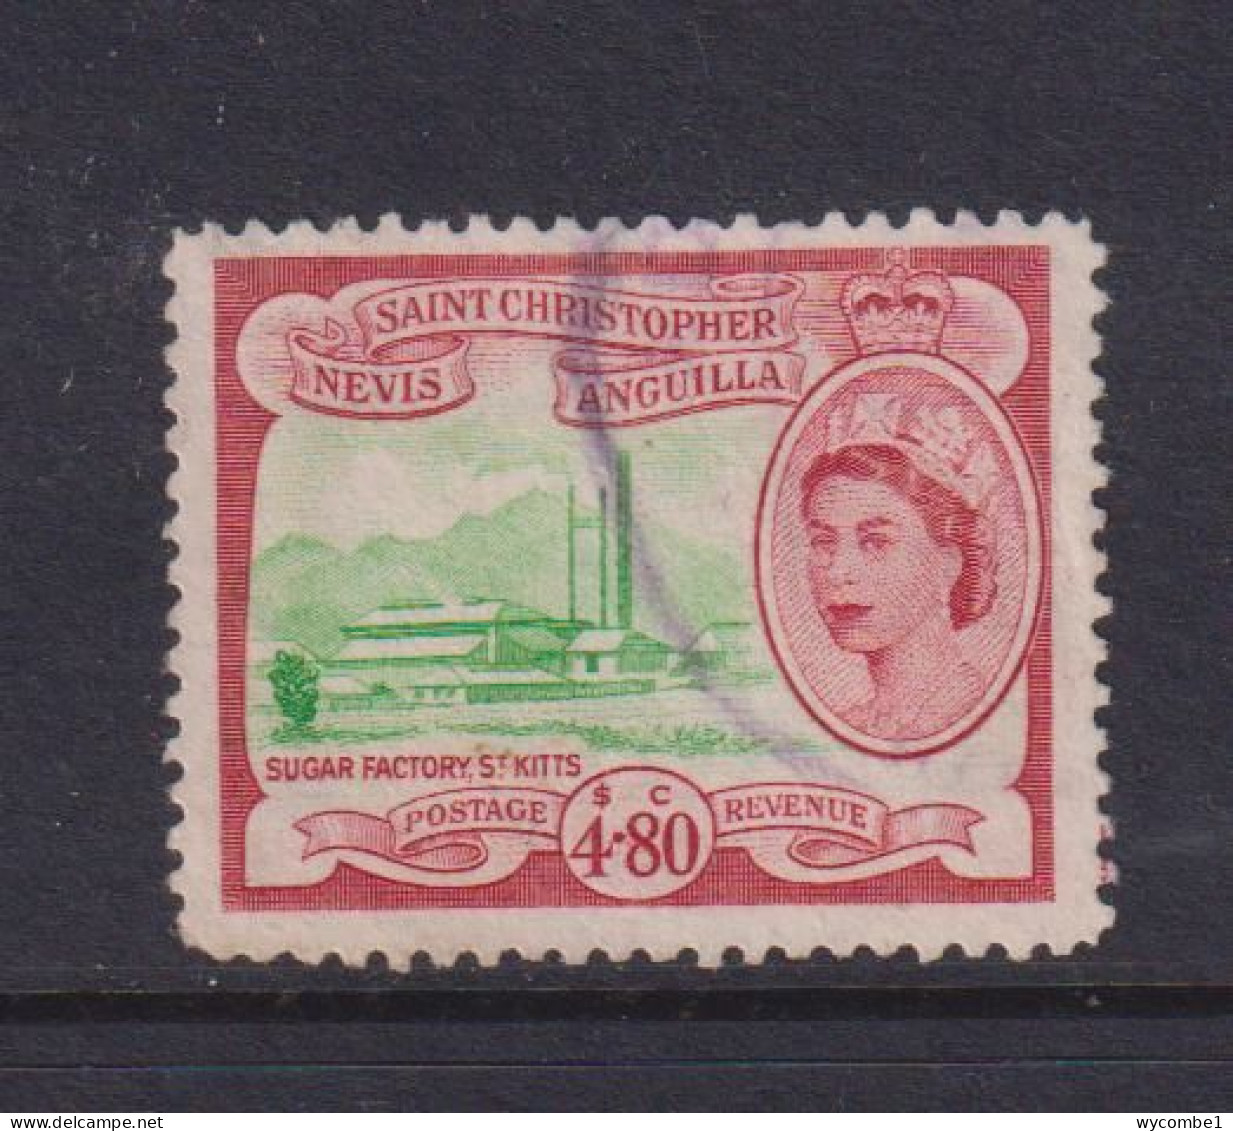 ST CHRISTOPHER NEVIS AND ANGUILLA - 1954  $4.80 Used As Scan - St.Christopher-Nevis-Anguilla (...-1980)